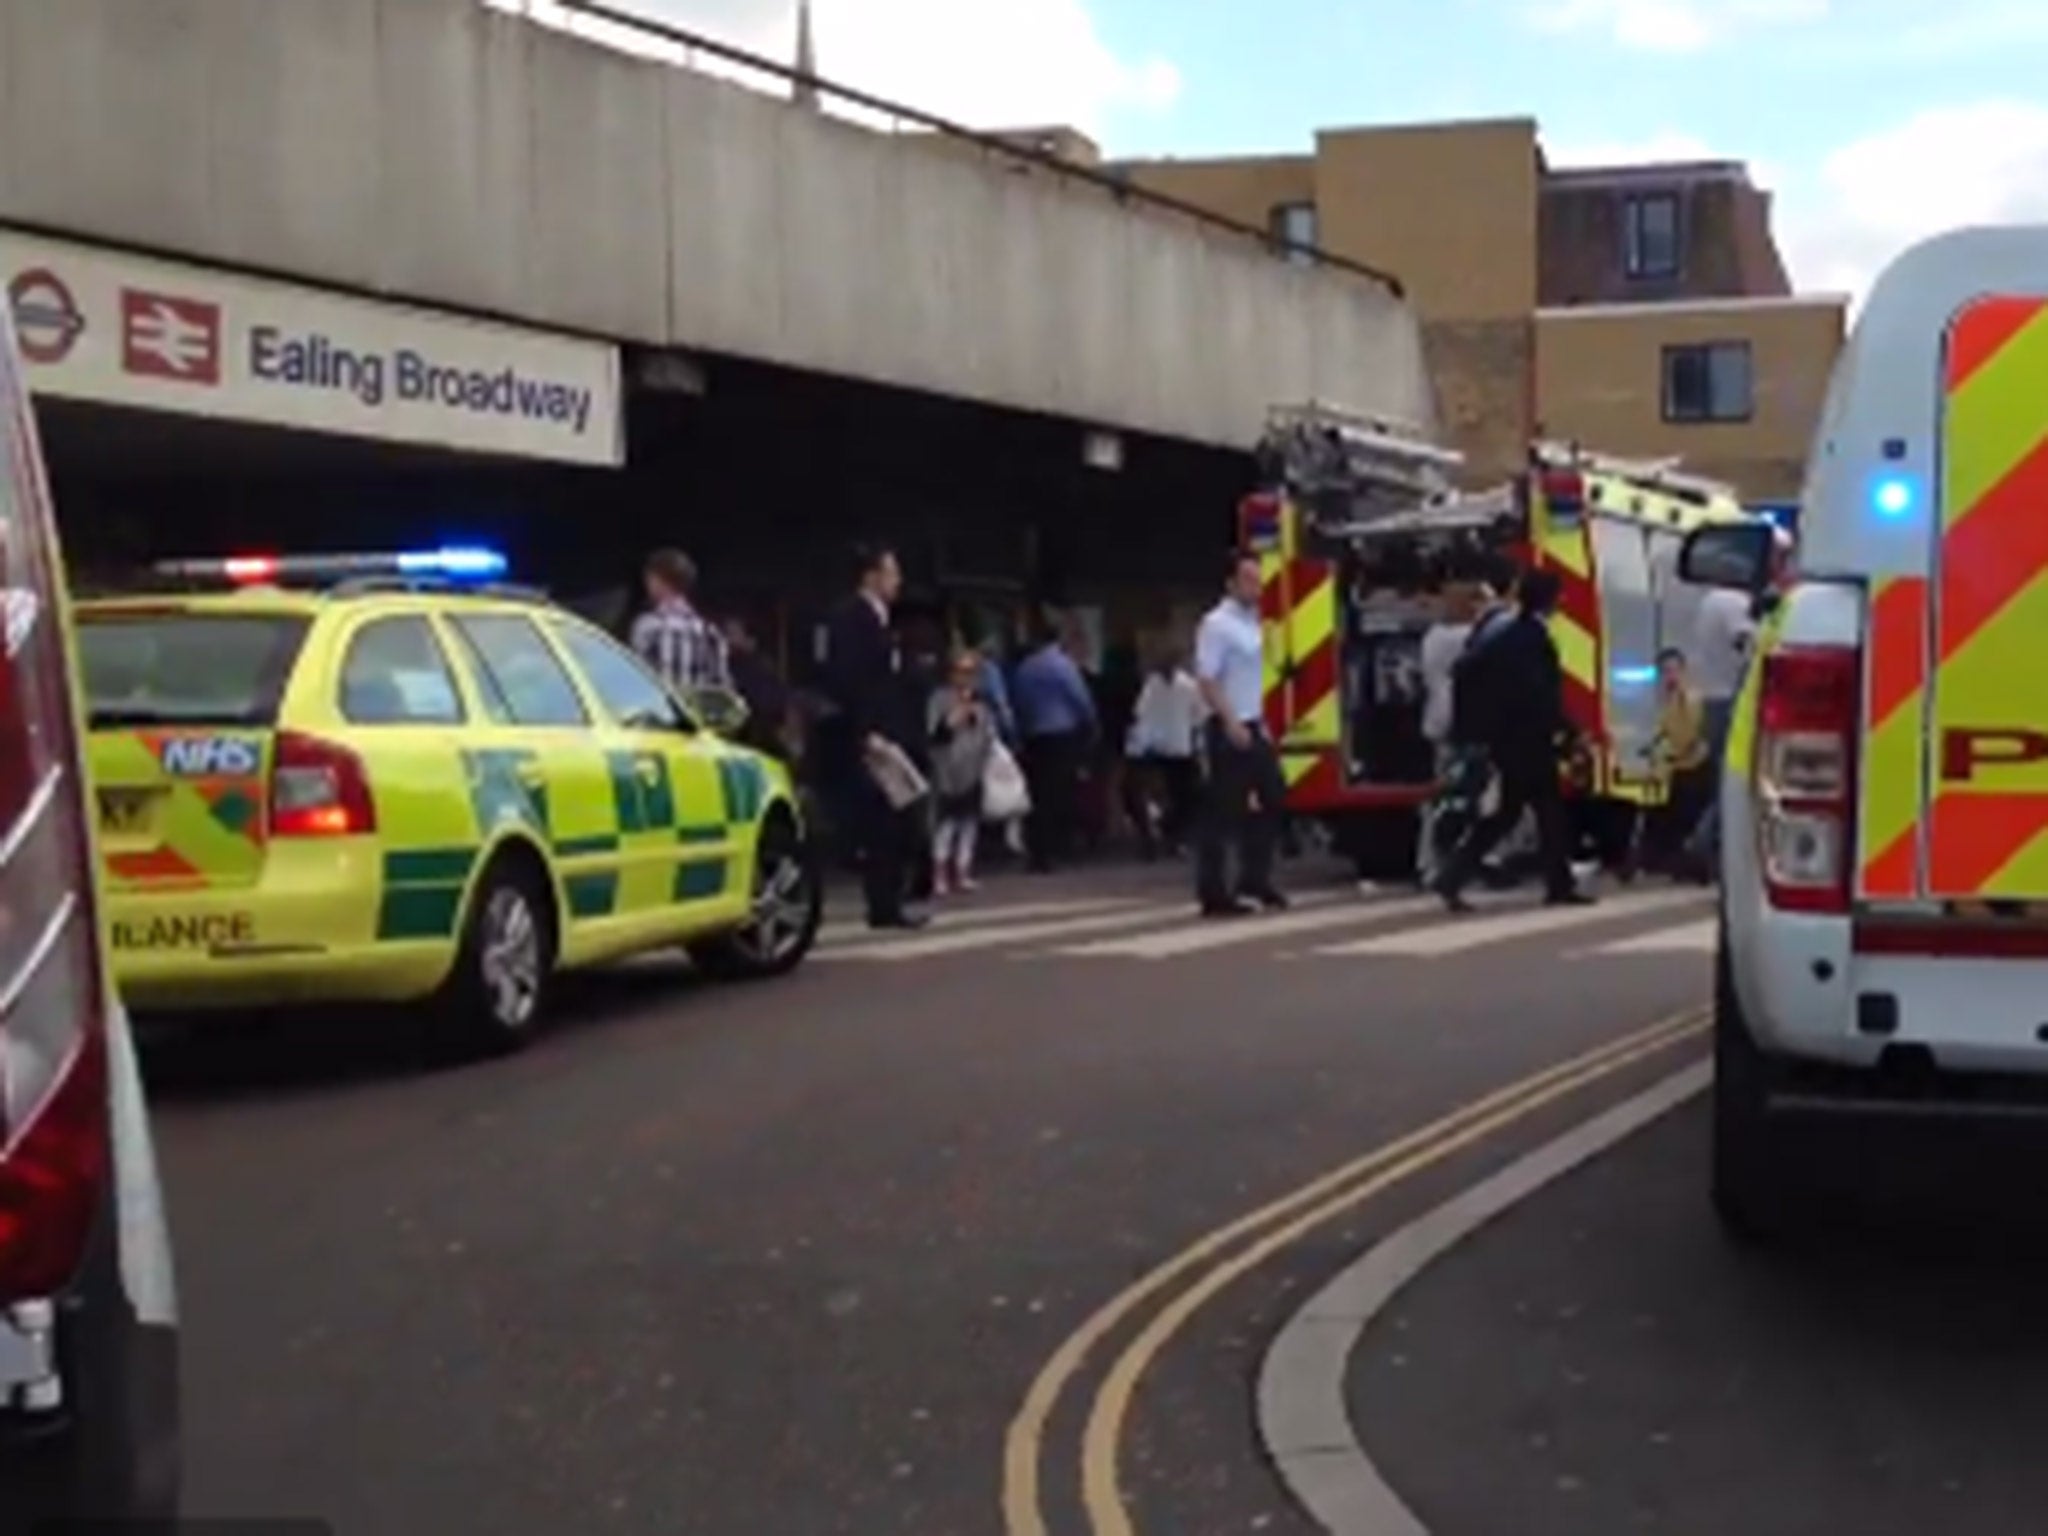 A woman and a 16-year-old girl have died after being hit by a train at Ealing Broadway station, west London